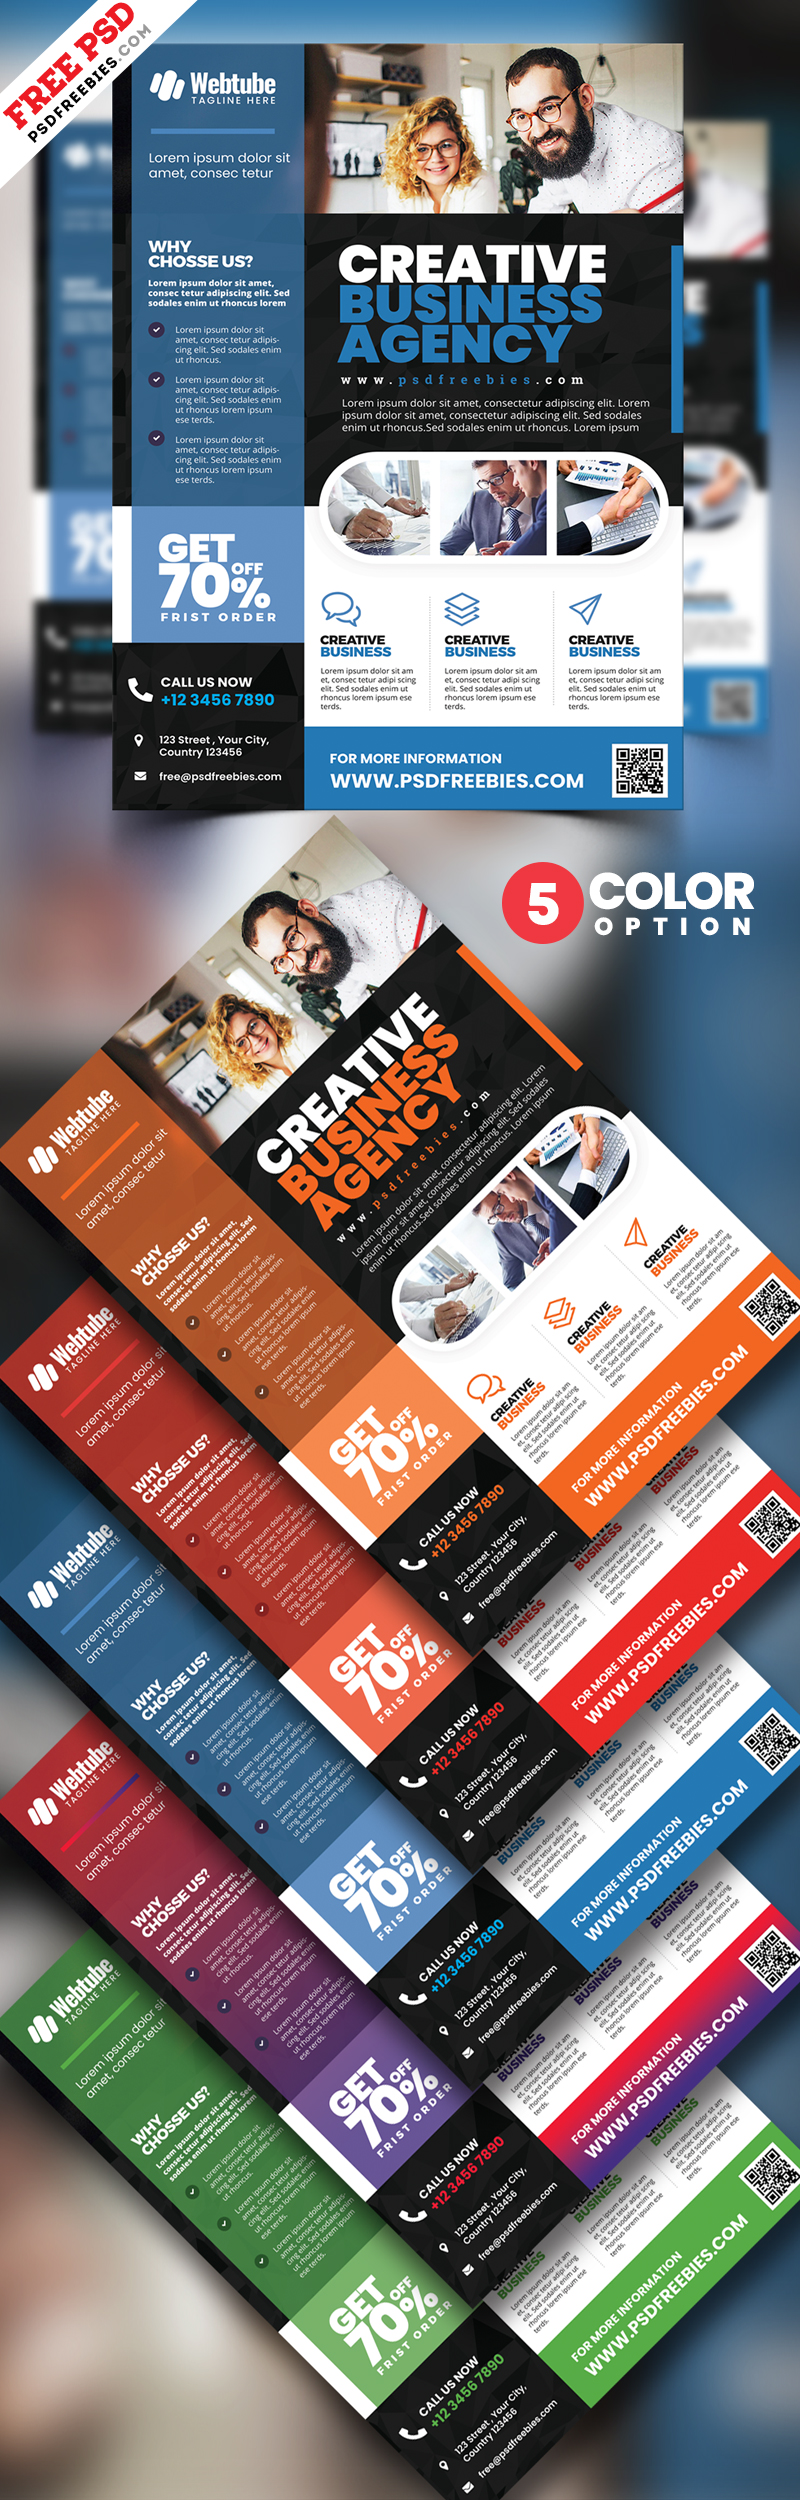 Multipurpose Business Flyer PSD Free Download